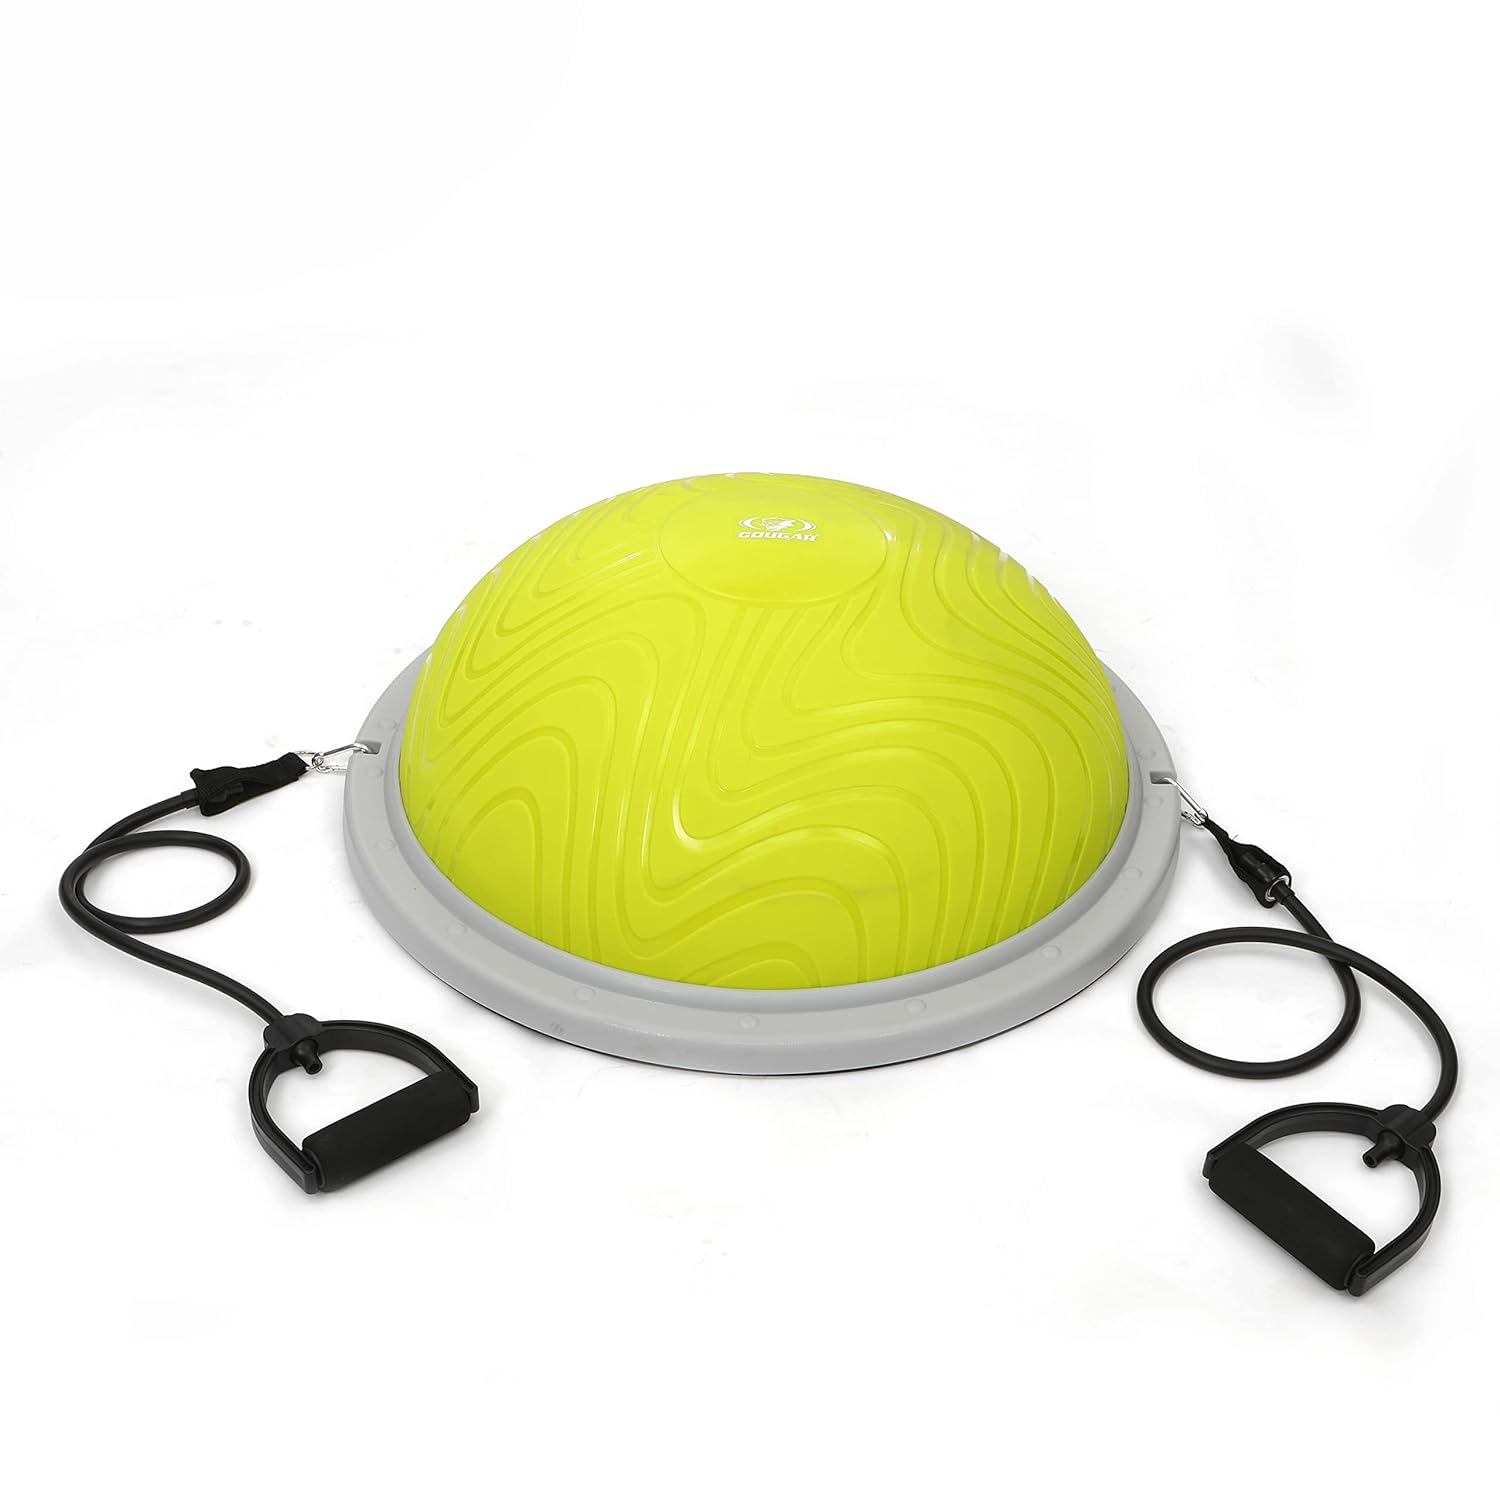 Cougar Half Balance Ball Balance ball with Resistance Bands Balance Trainer with Pump/ for Core Ab Training